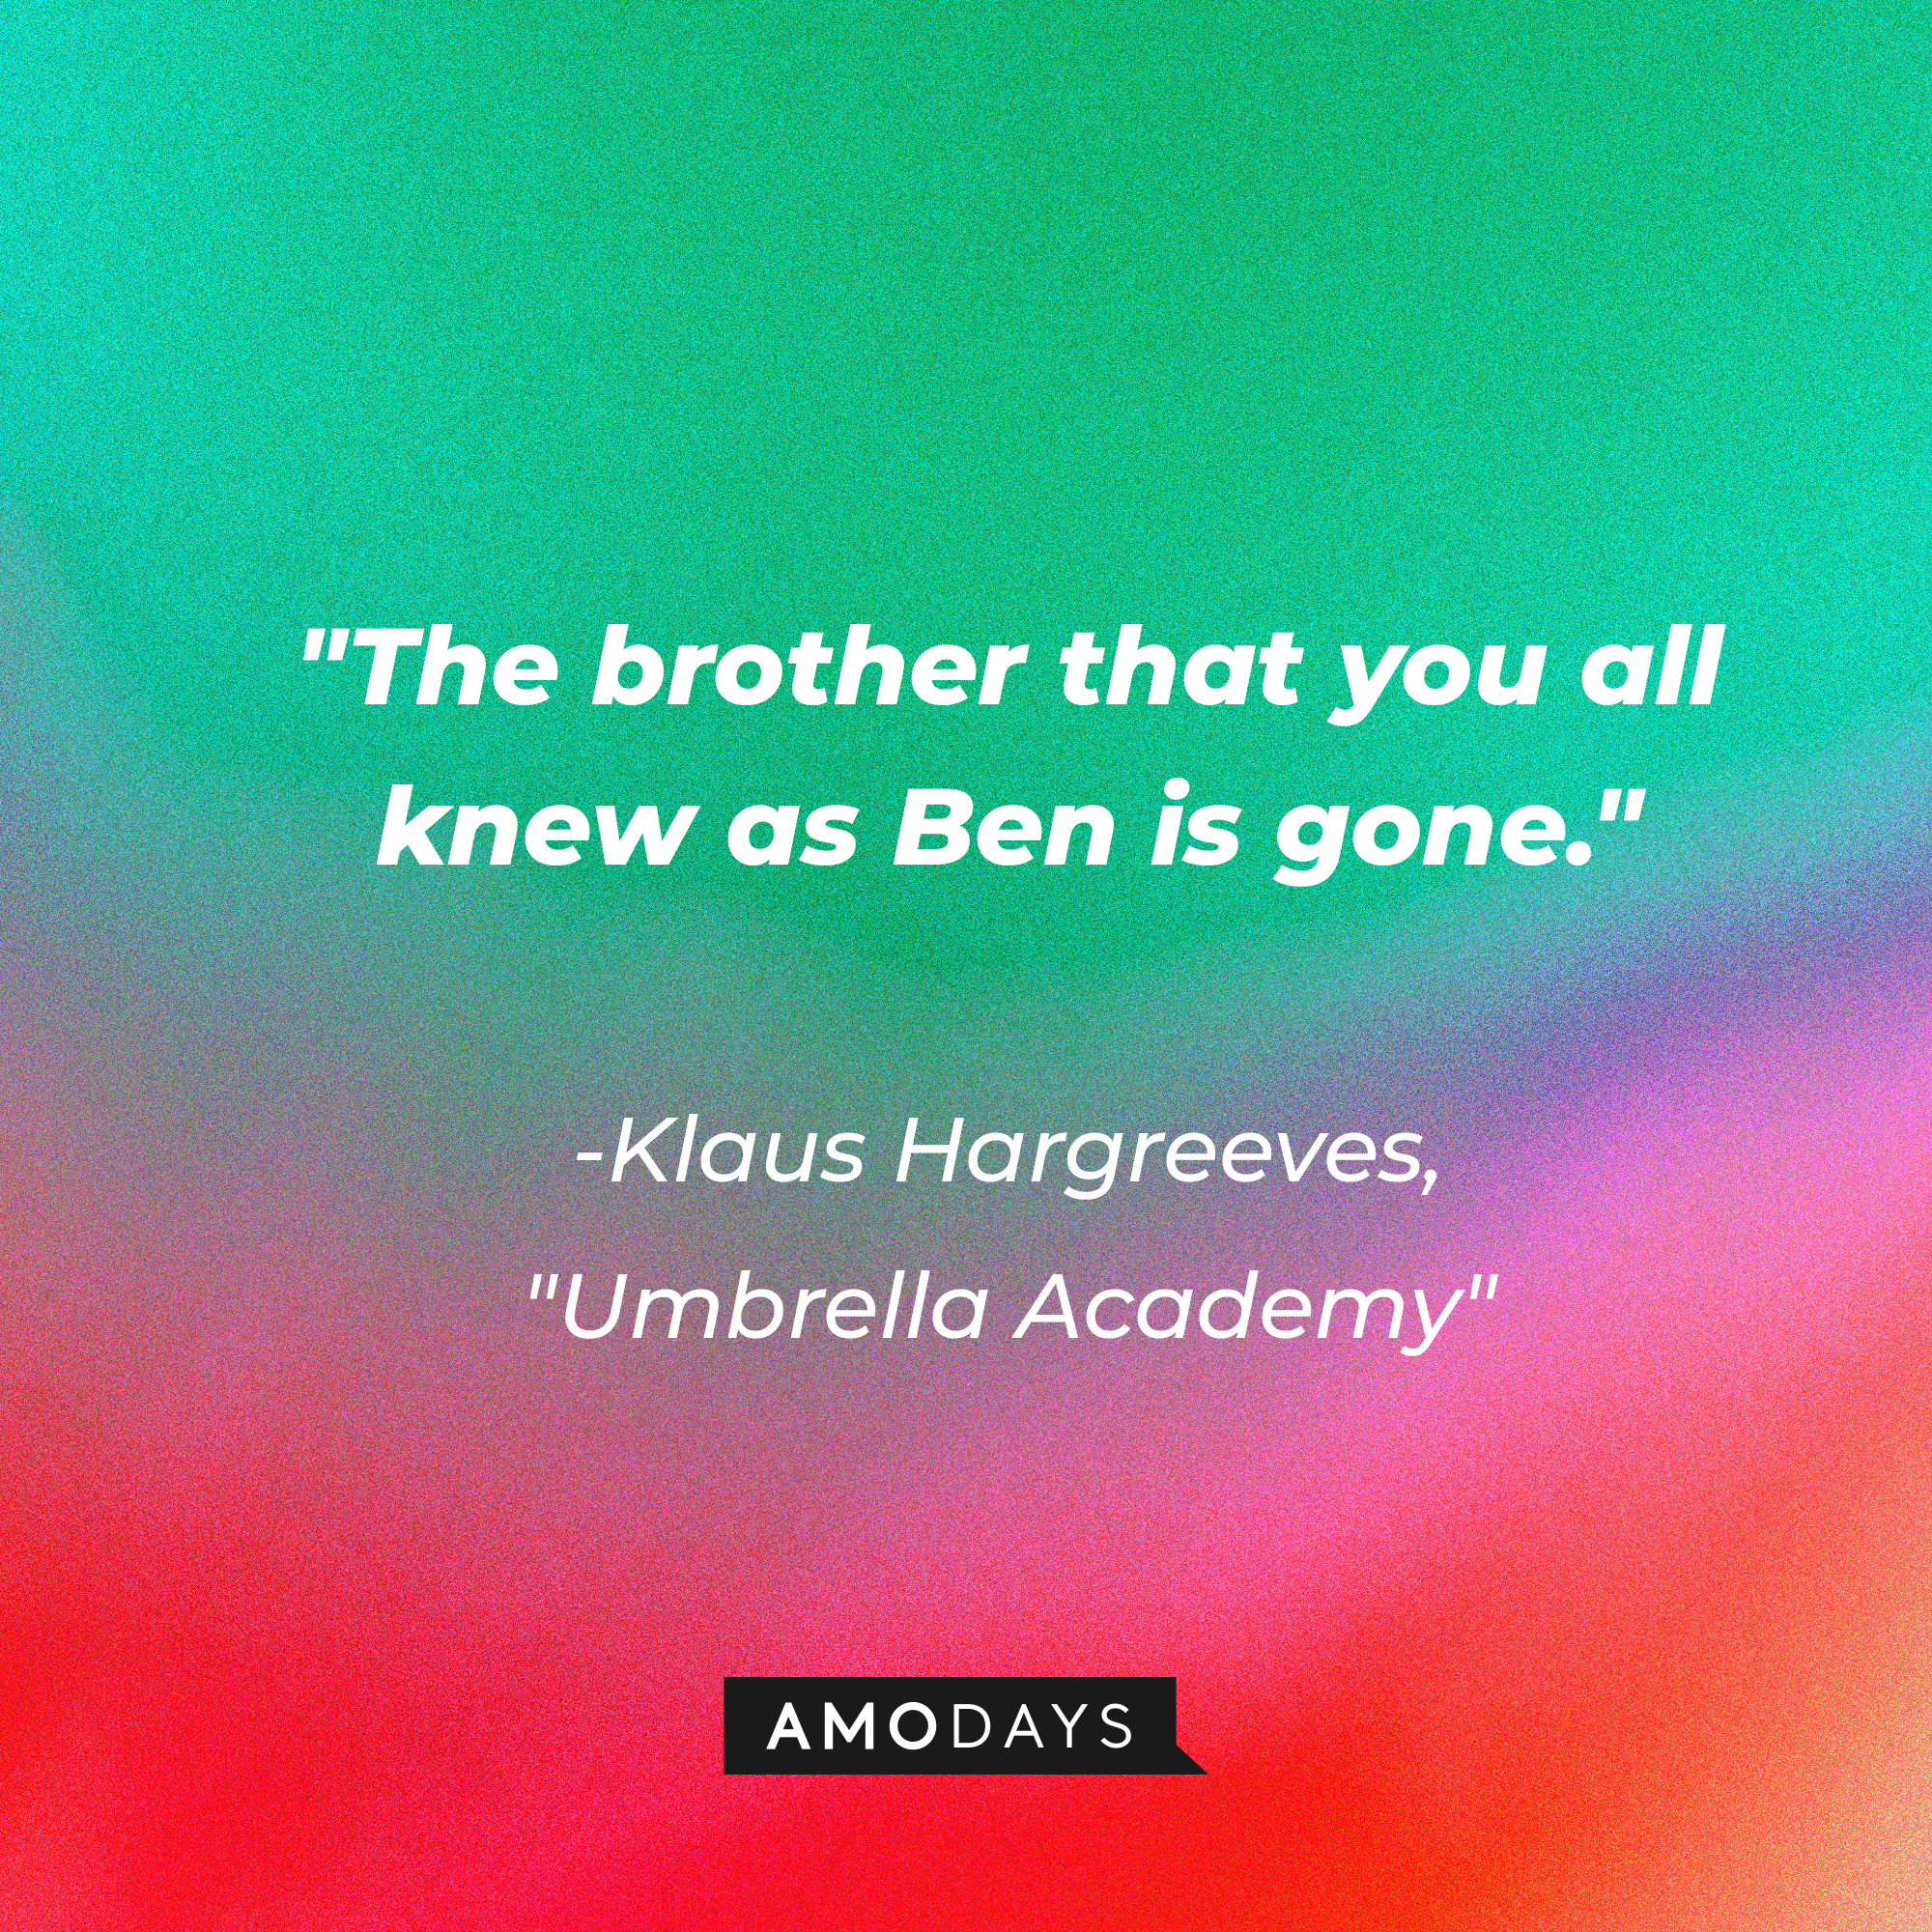 Klaus Hargreeves' quote in "The Umbrella Academy:" "The brother that you all knew as Ben is gone." | Source: AmoDays